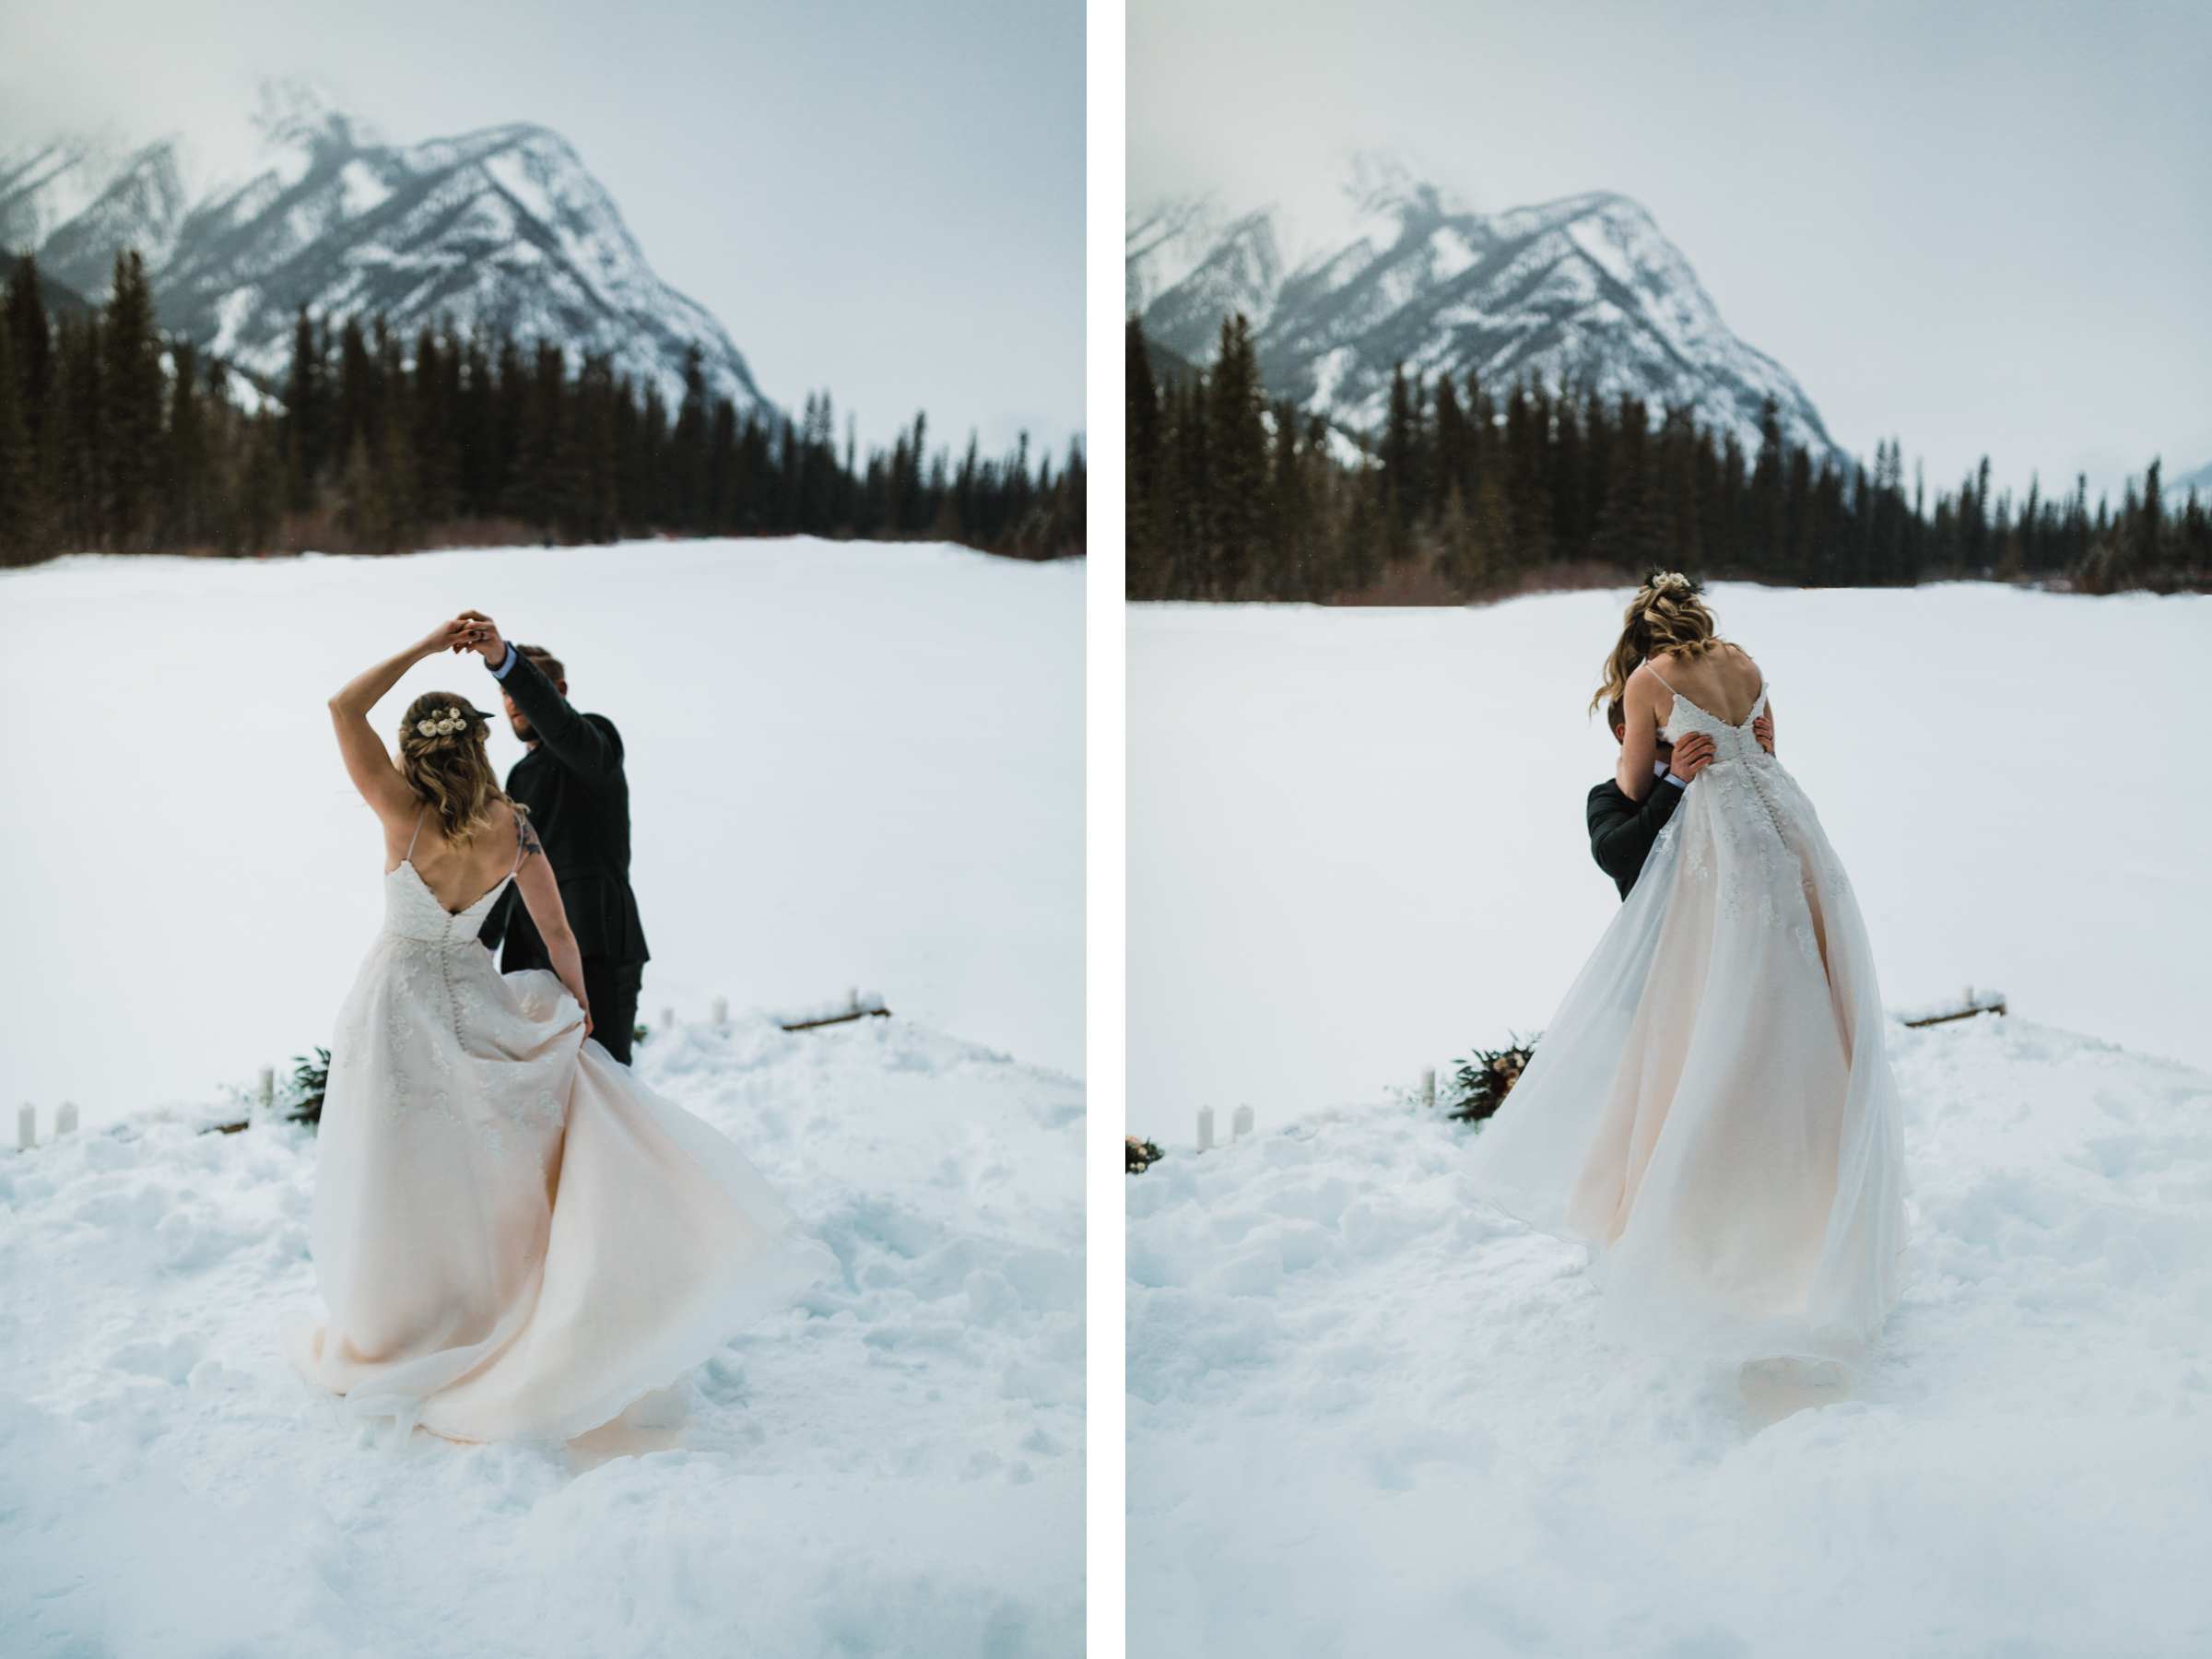 Canmore Elopement Photographer in the Canadian Rockies - Image 35